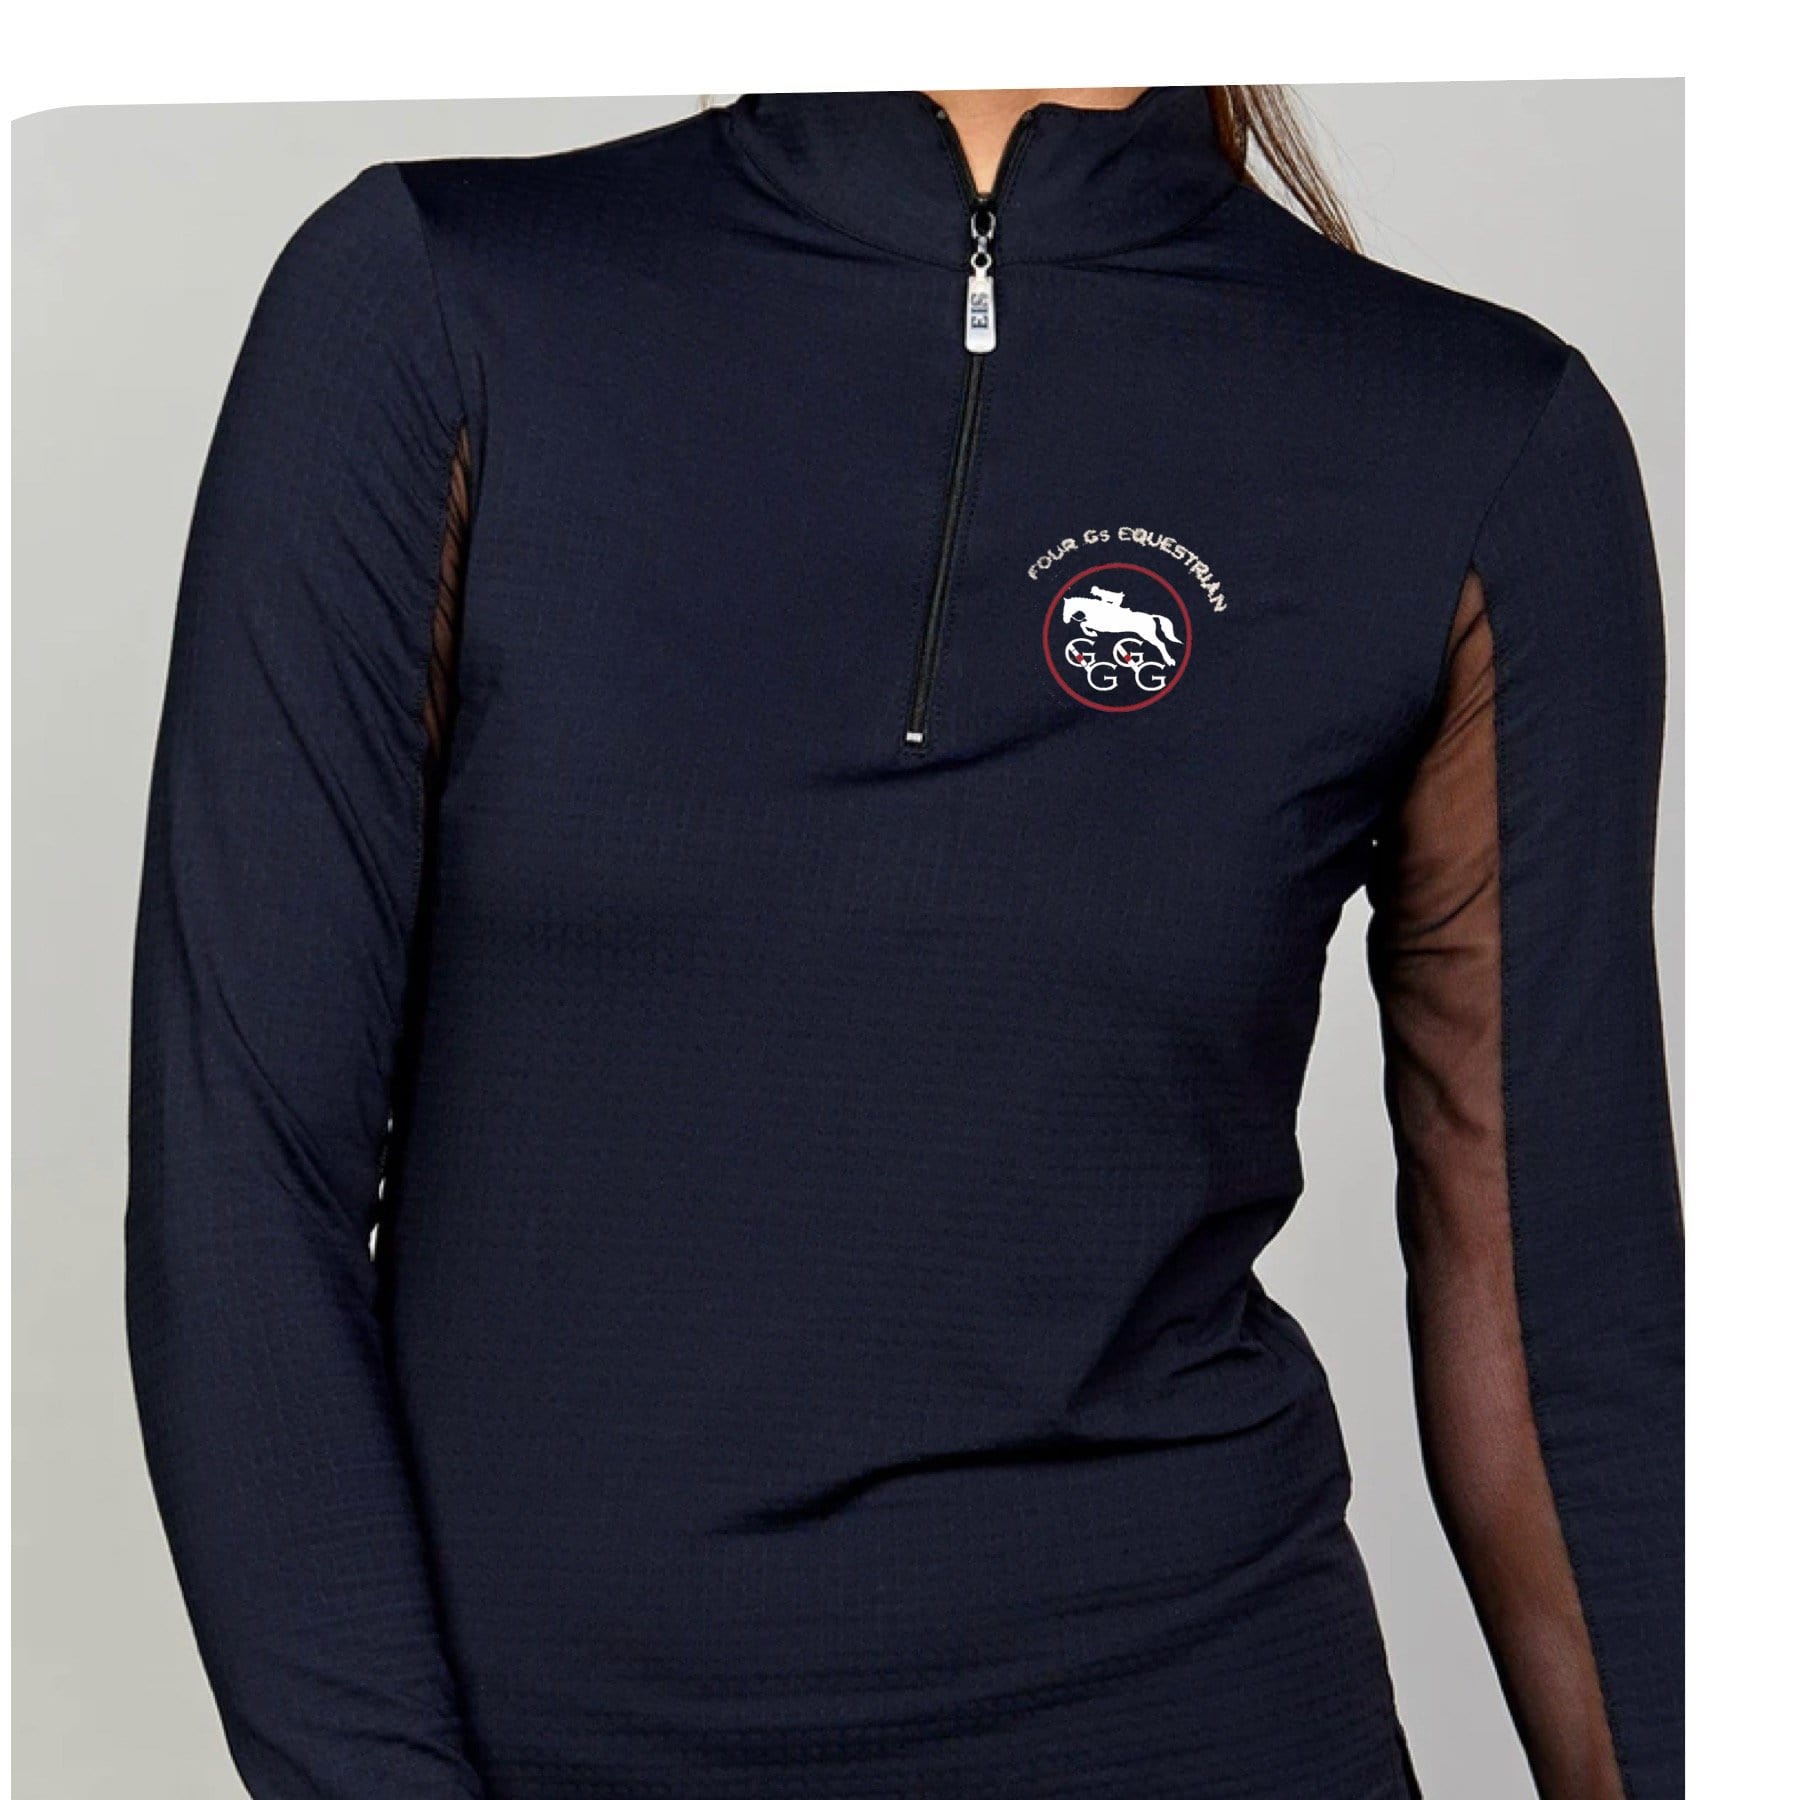 Equestrian Team Apparel Four G's Equestrian Sun Shirt equestrian team apparel online tack store mobile tack store custom farm apparel custom show stable clothing equestrian lifestyle horse show clothing riding clothes horses equestrian tack store